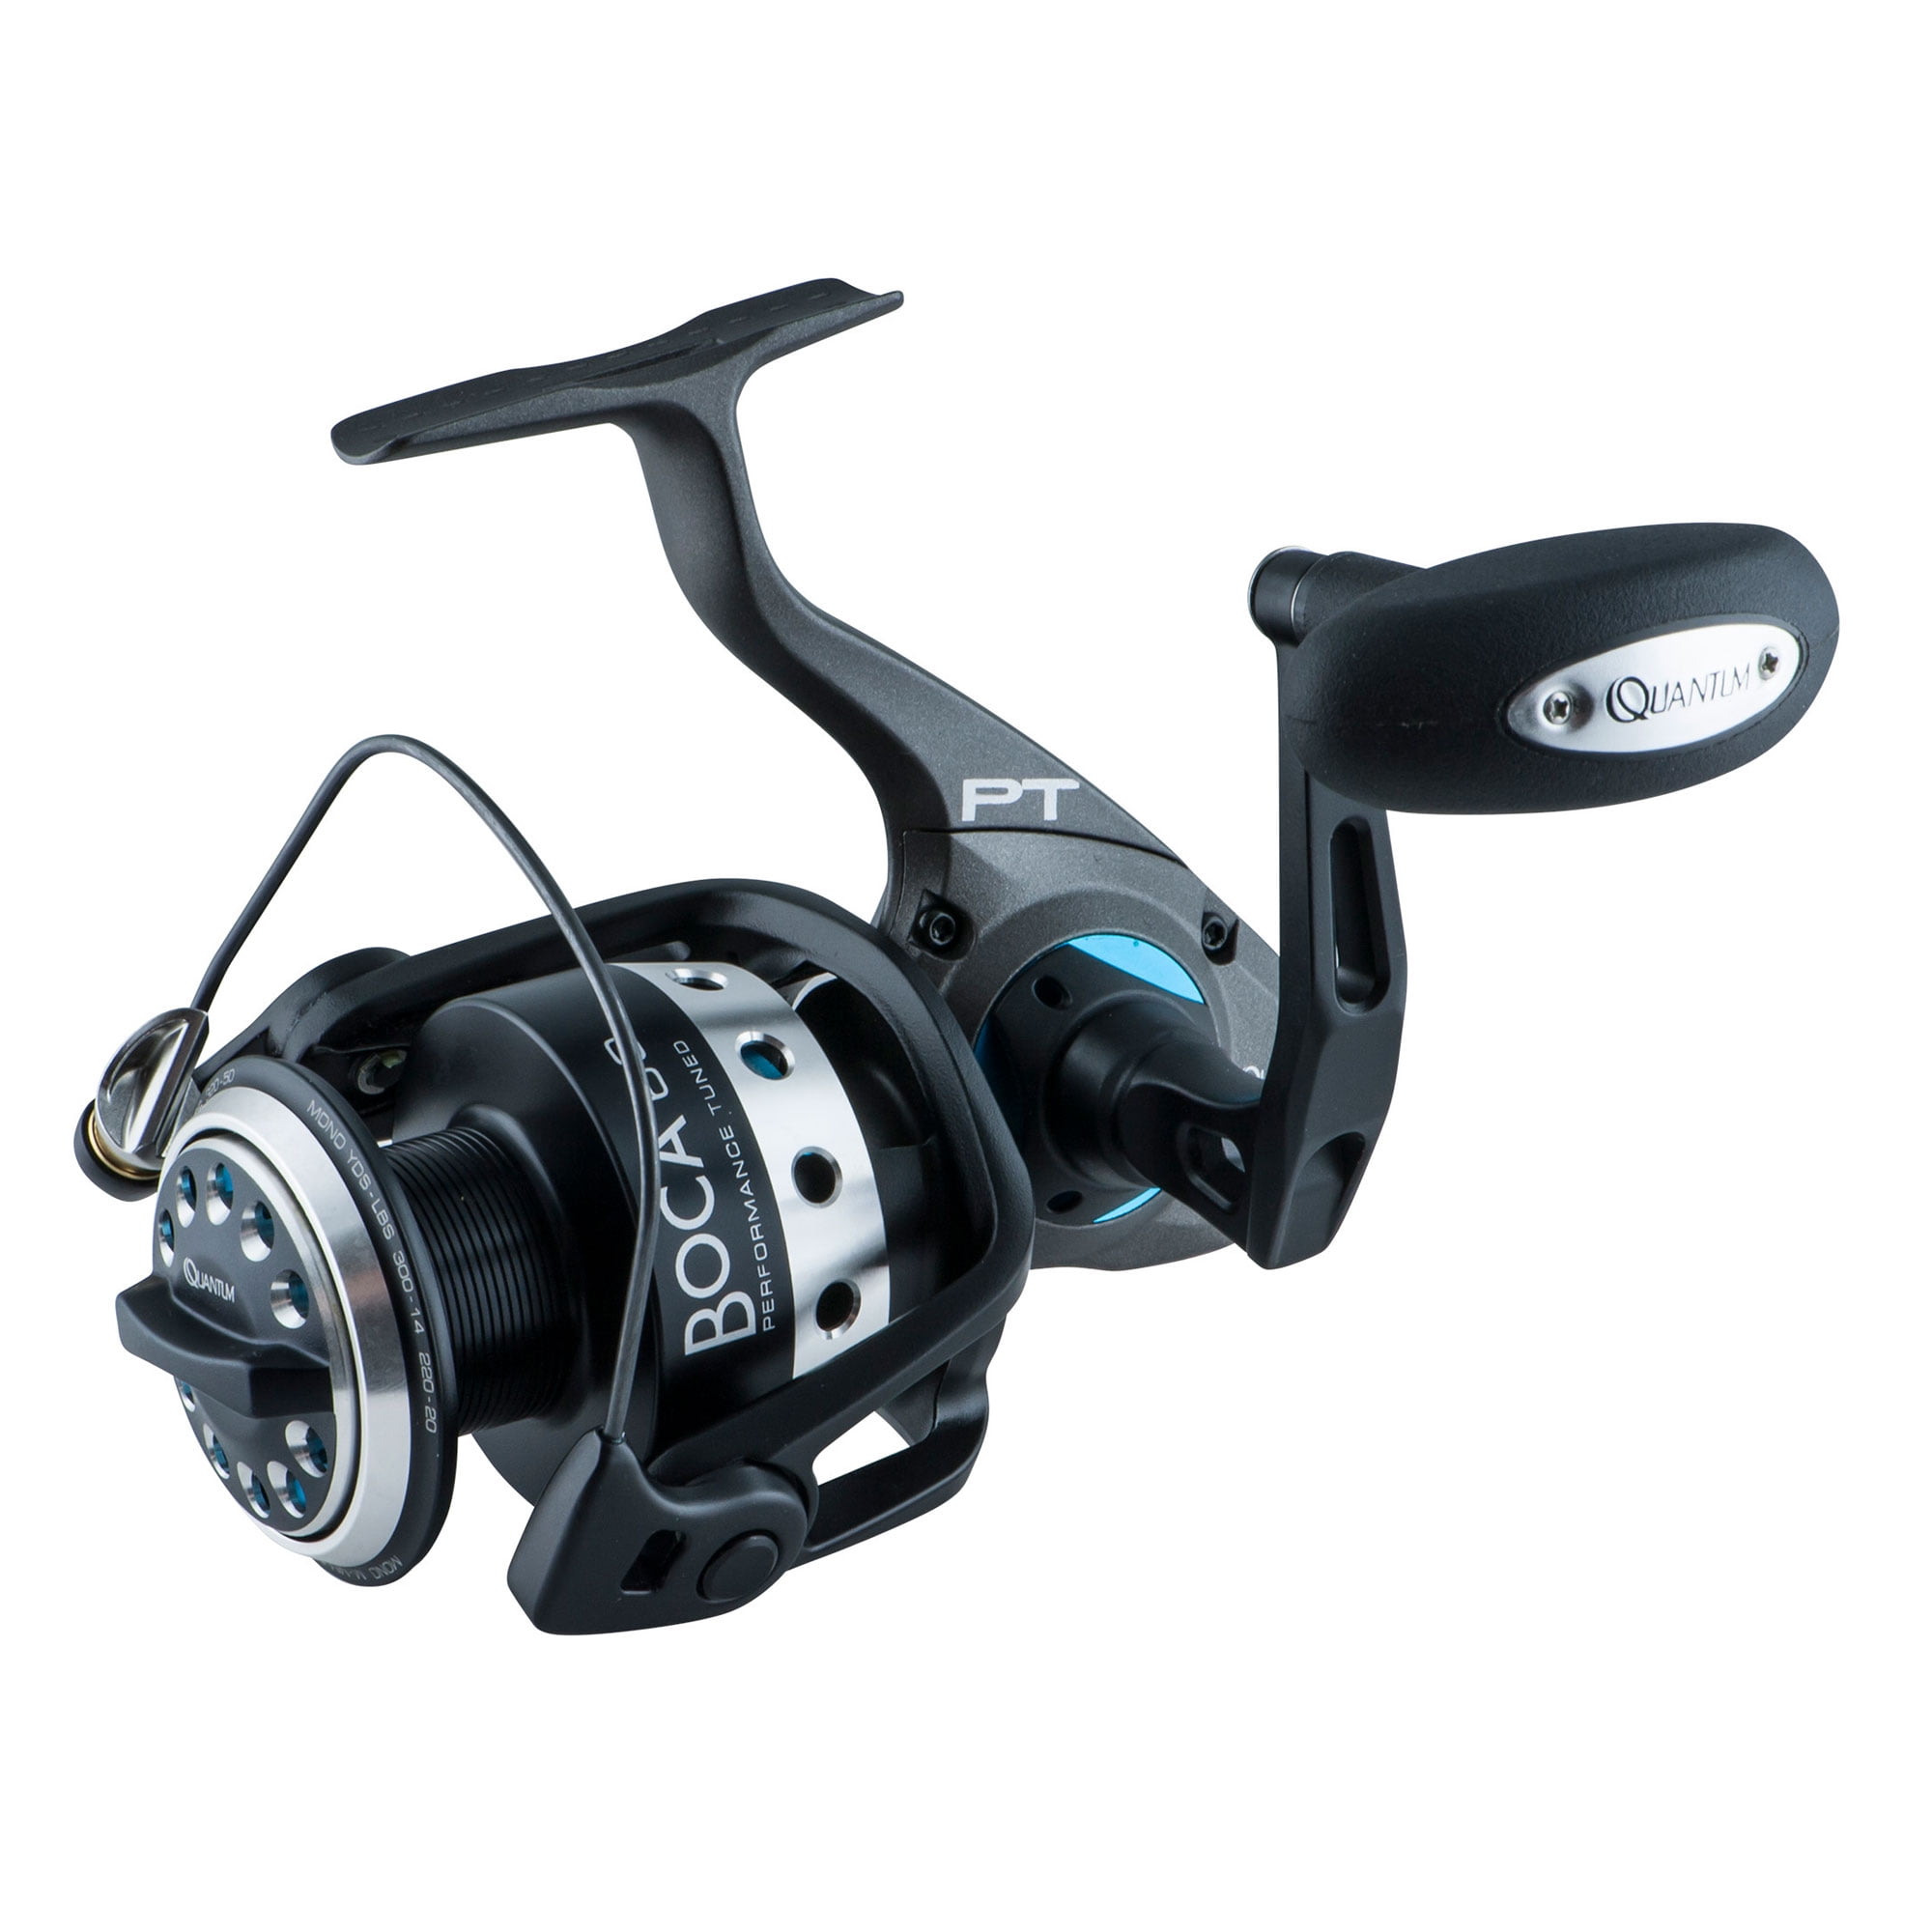 Zebco Quantum Energy E2-2 Fishing Reel Body Bail Assembly Complete